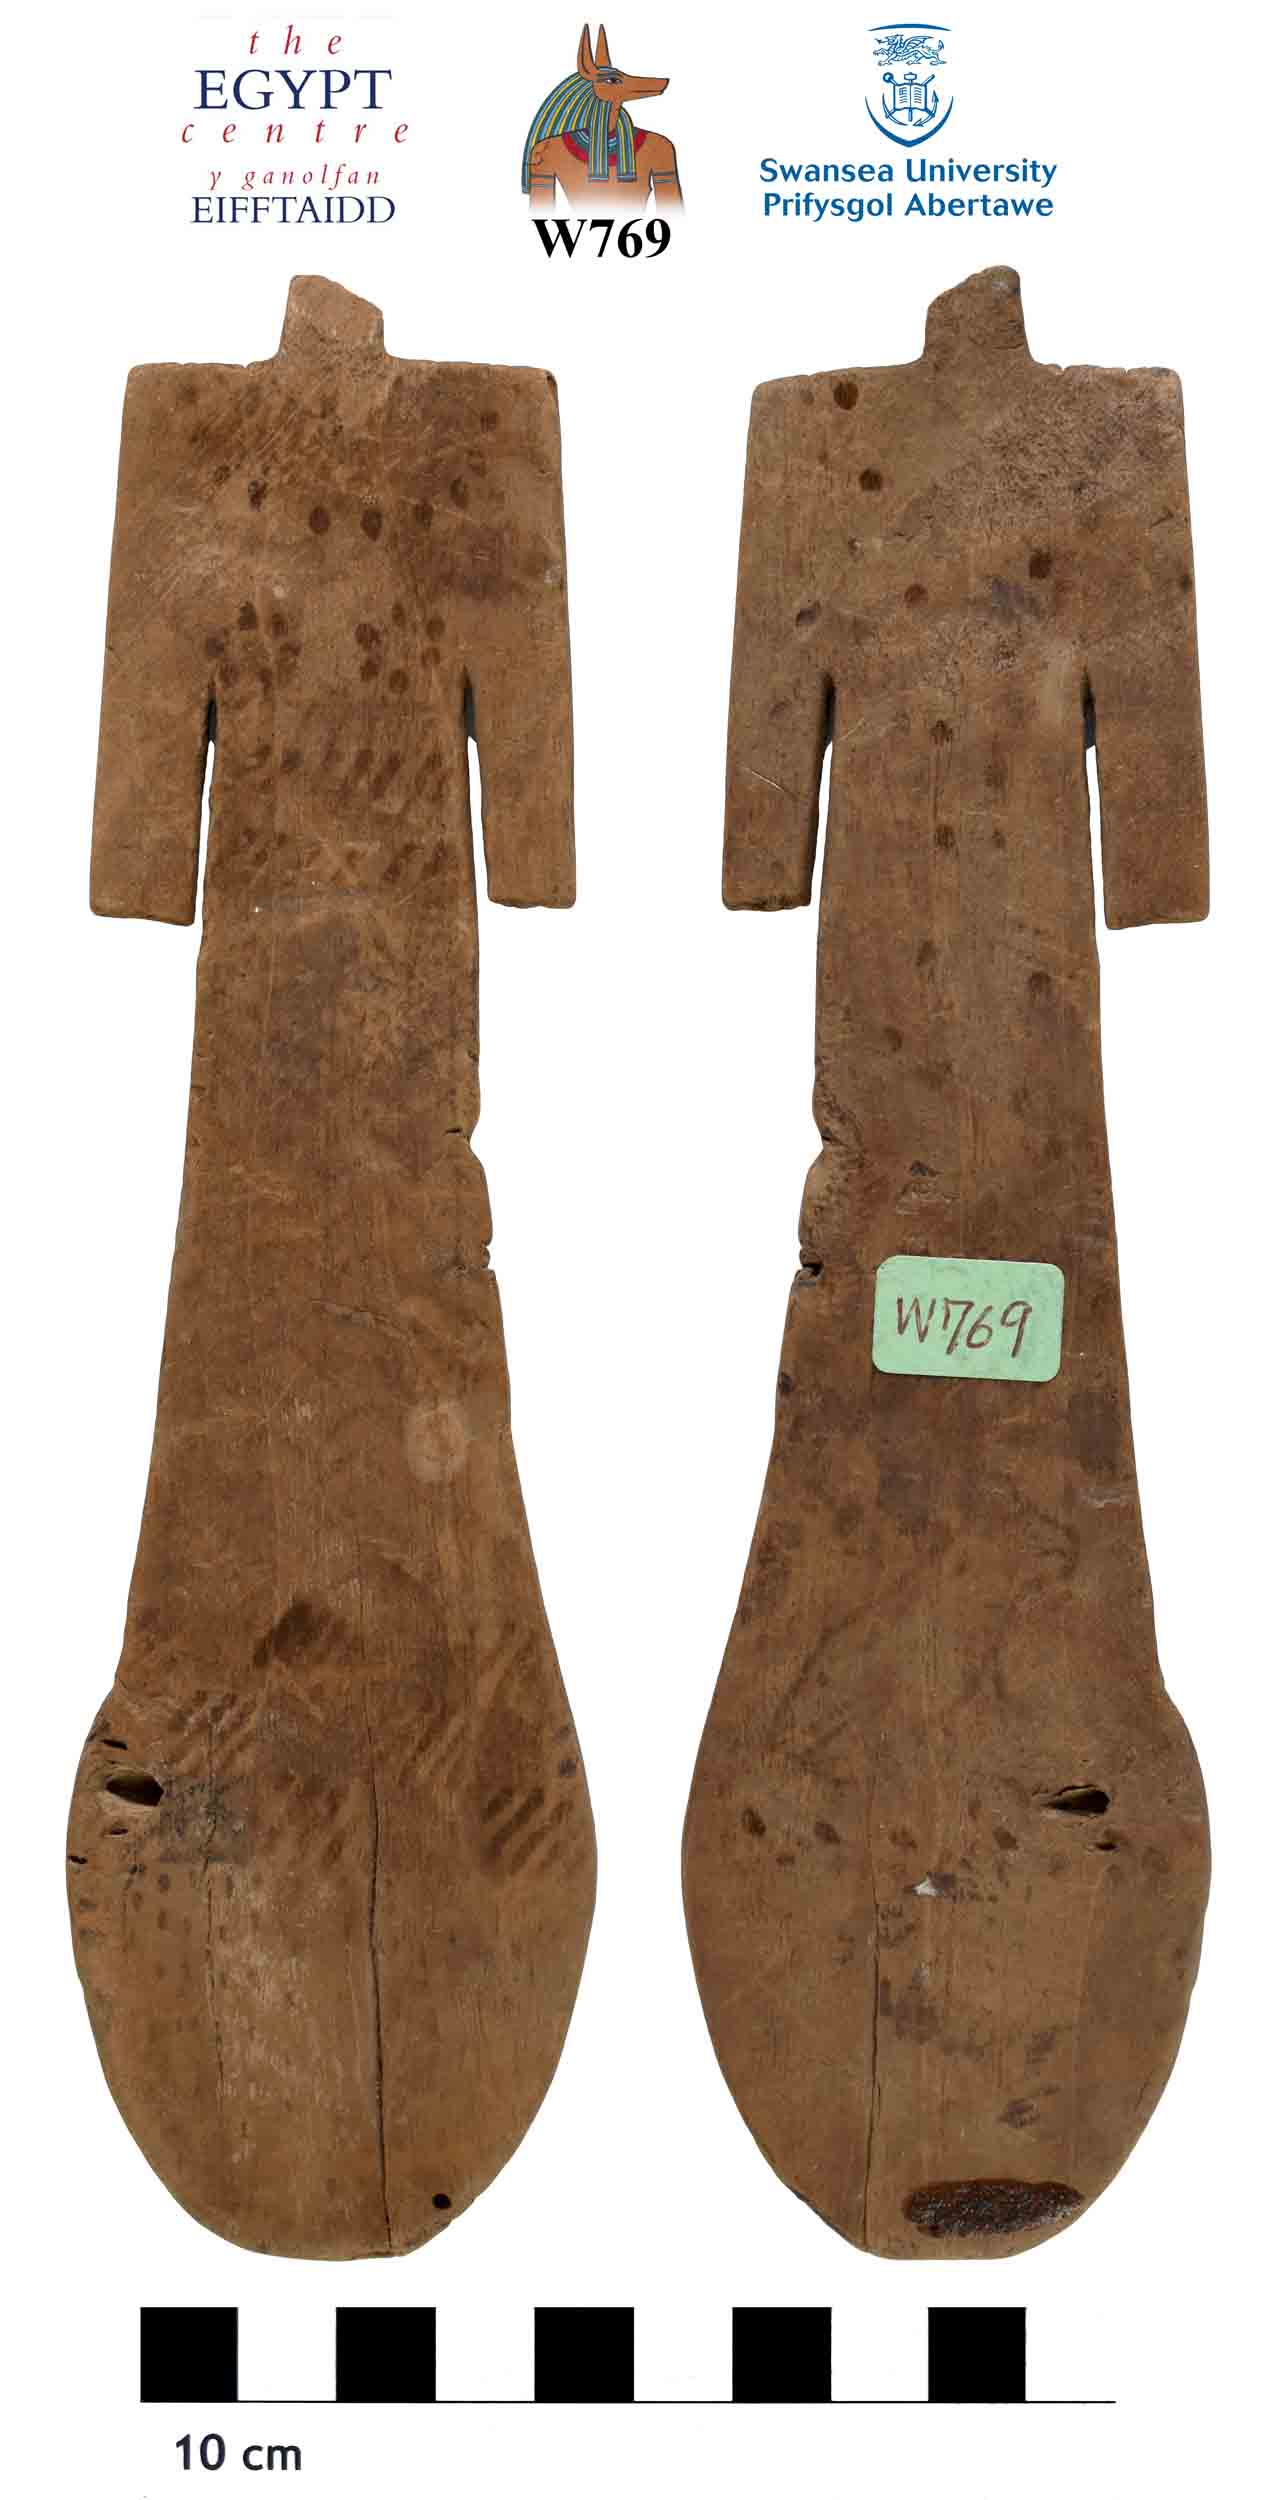 Image for: Wooden paddle doll